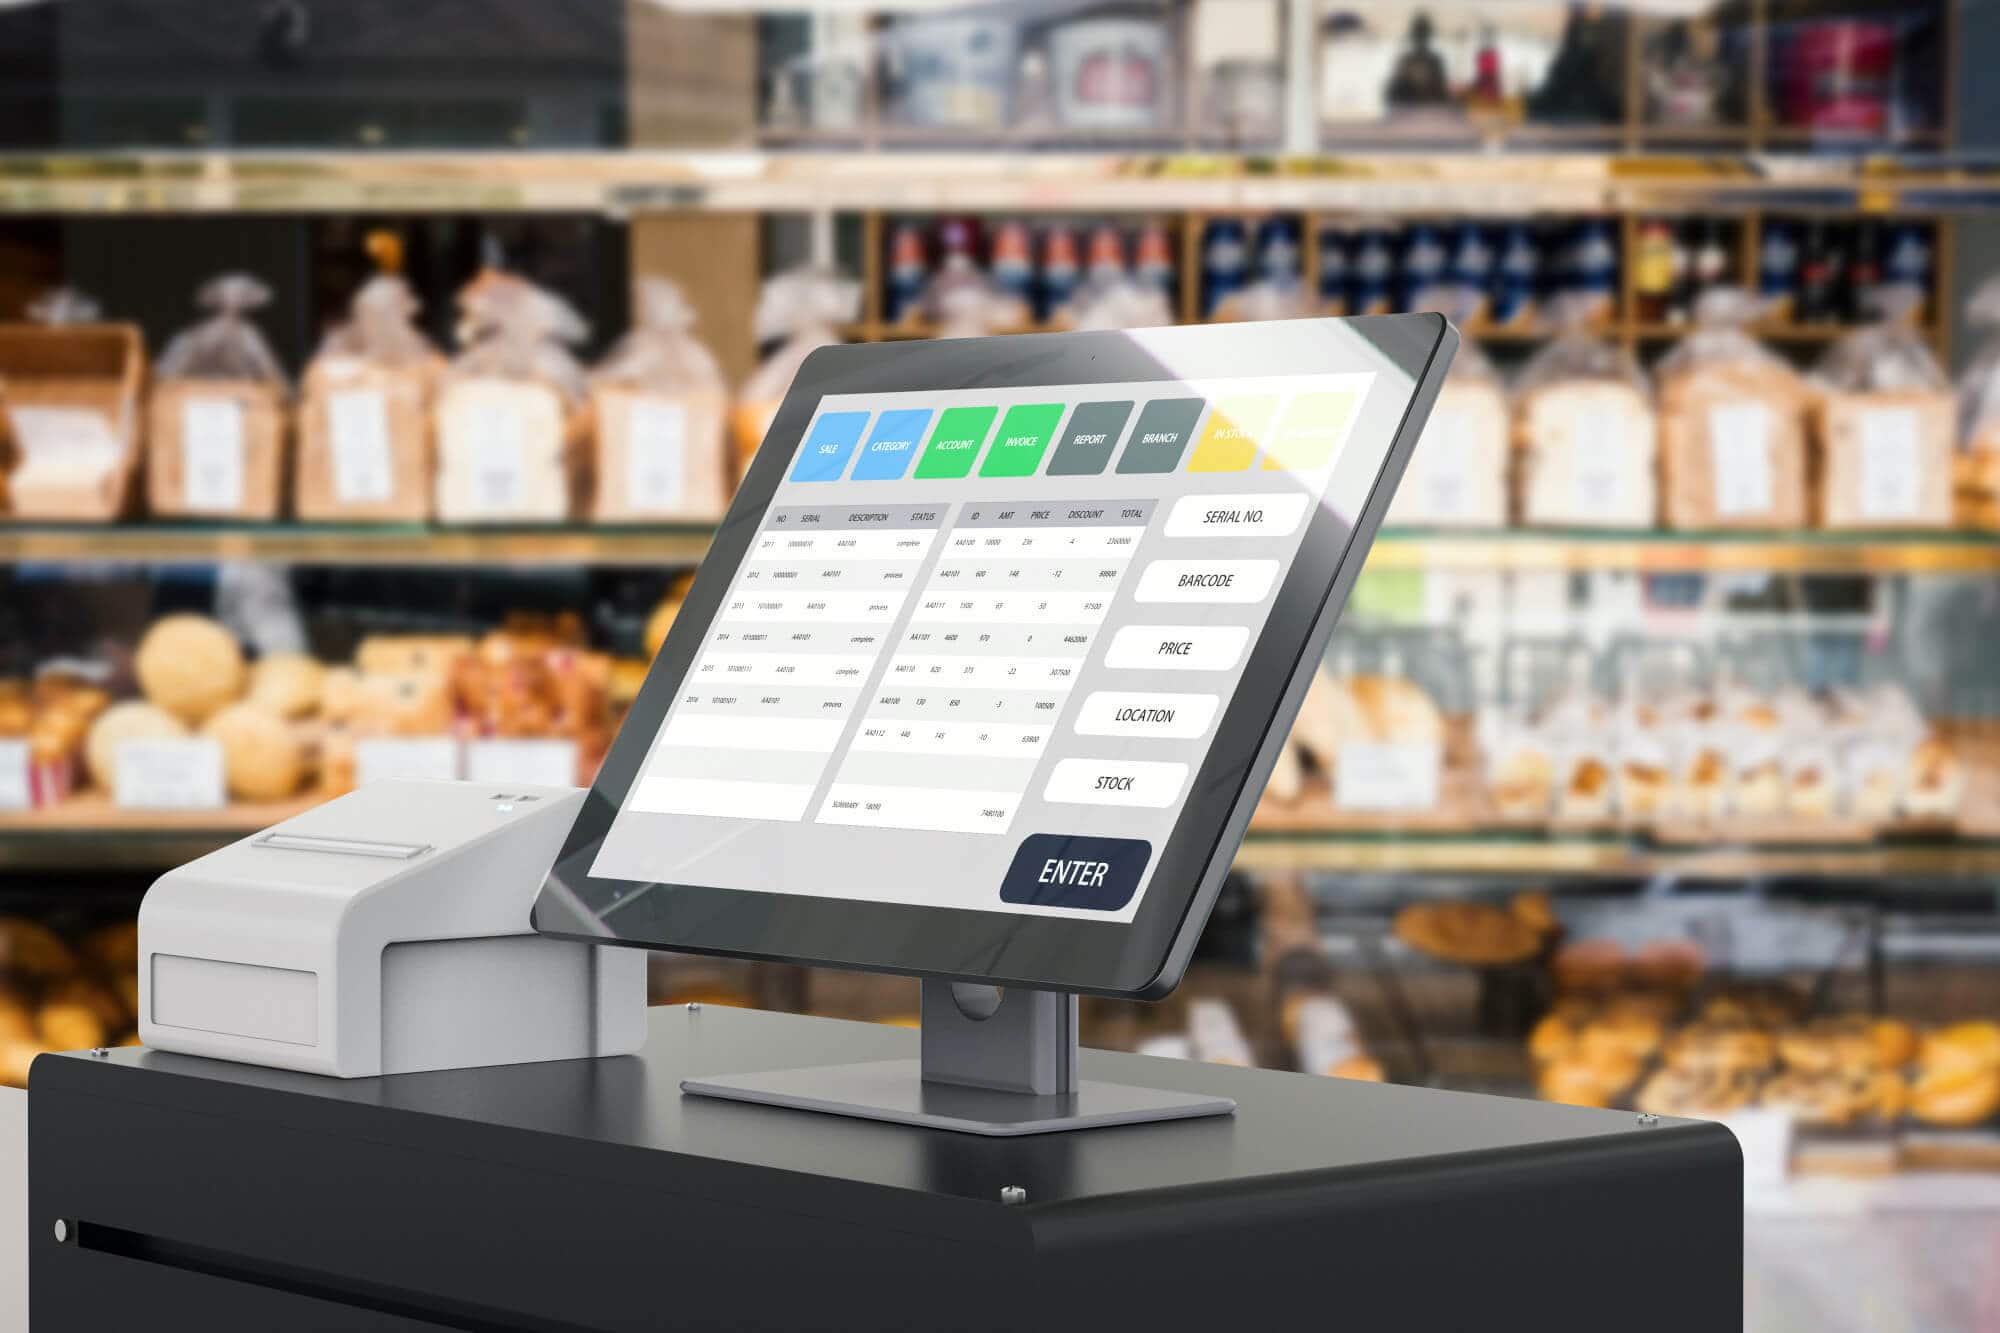 Choosing the Right Retail POS System for Your Business